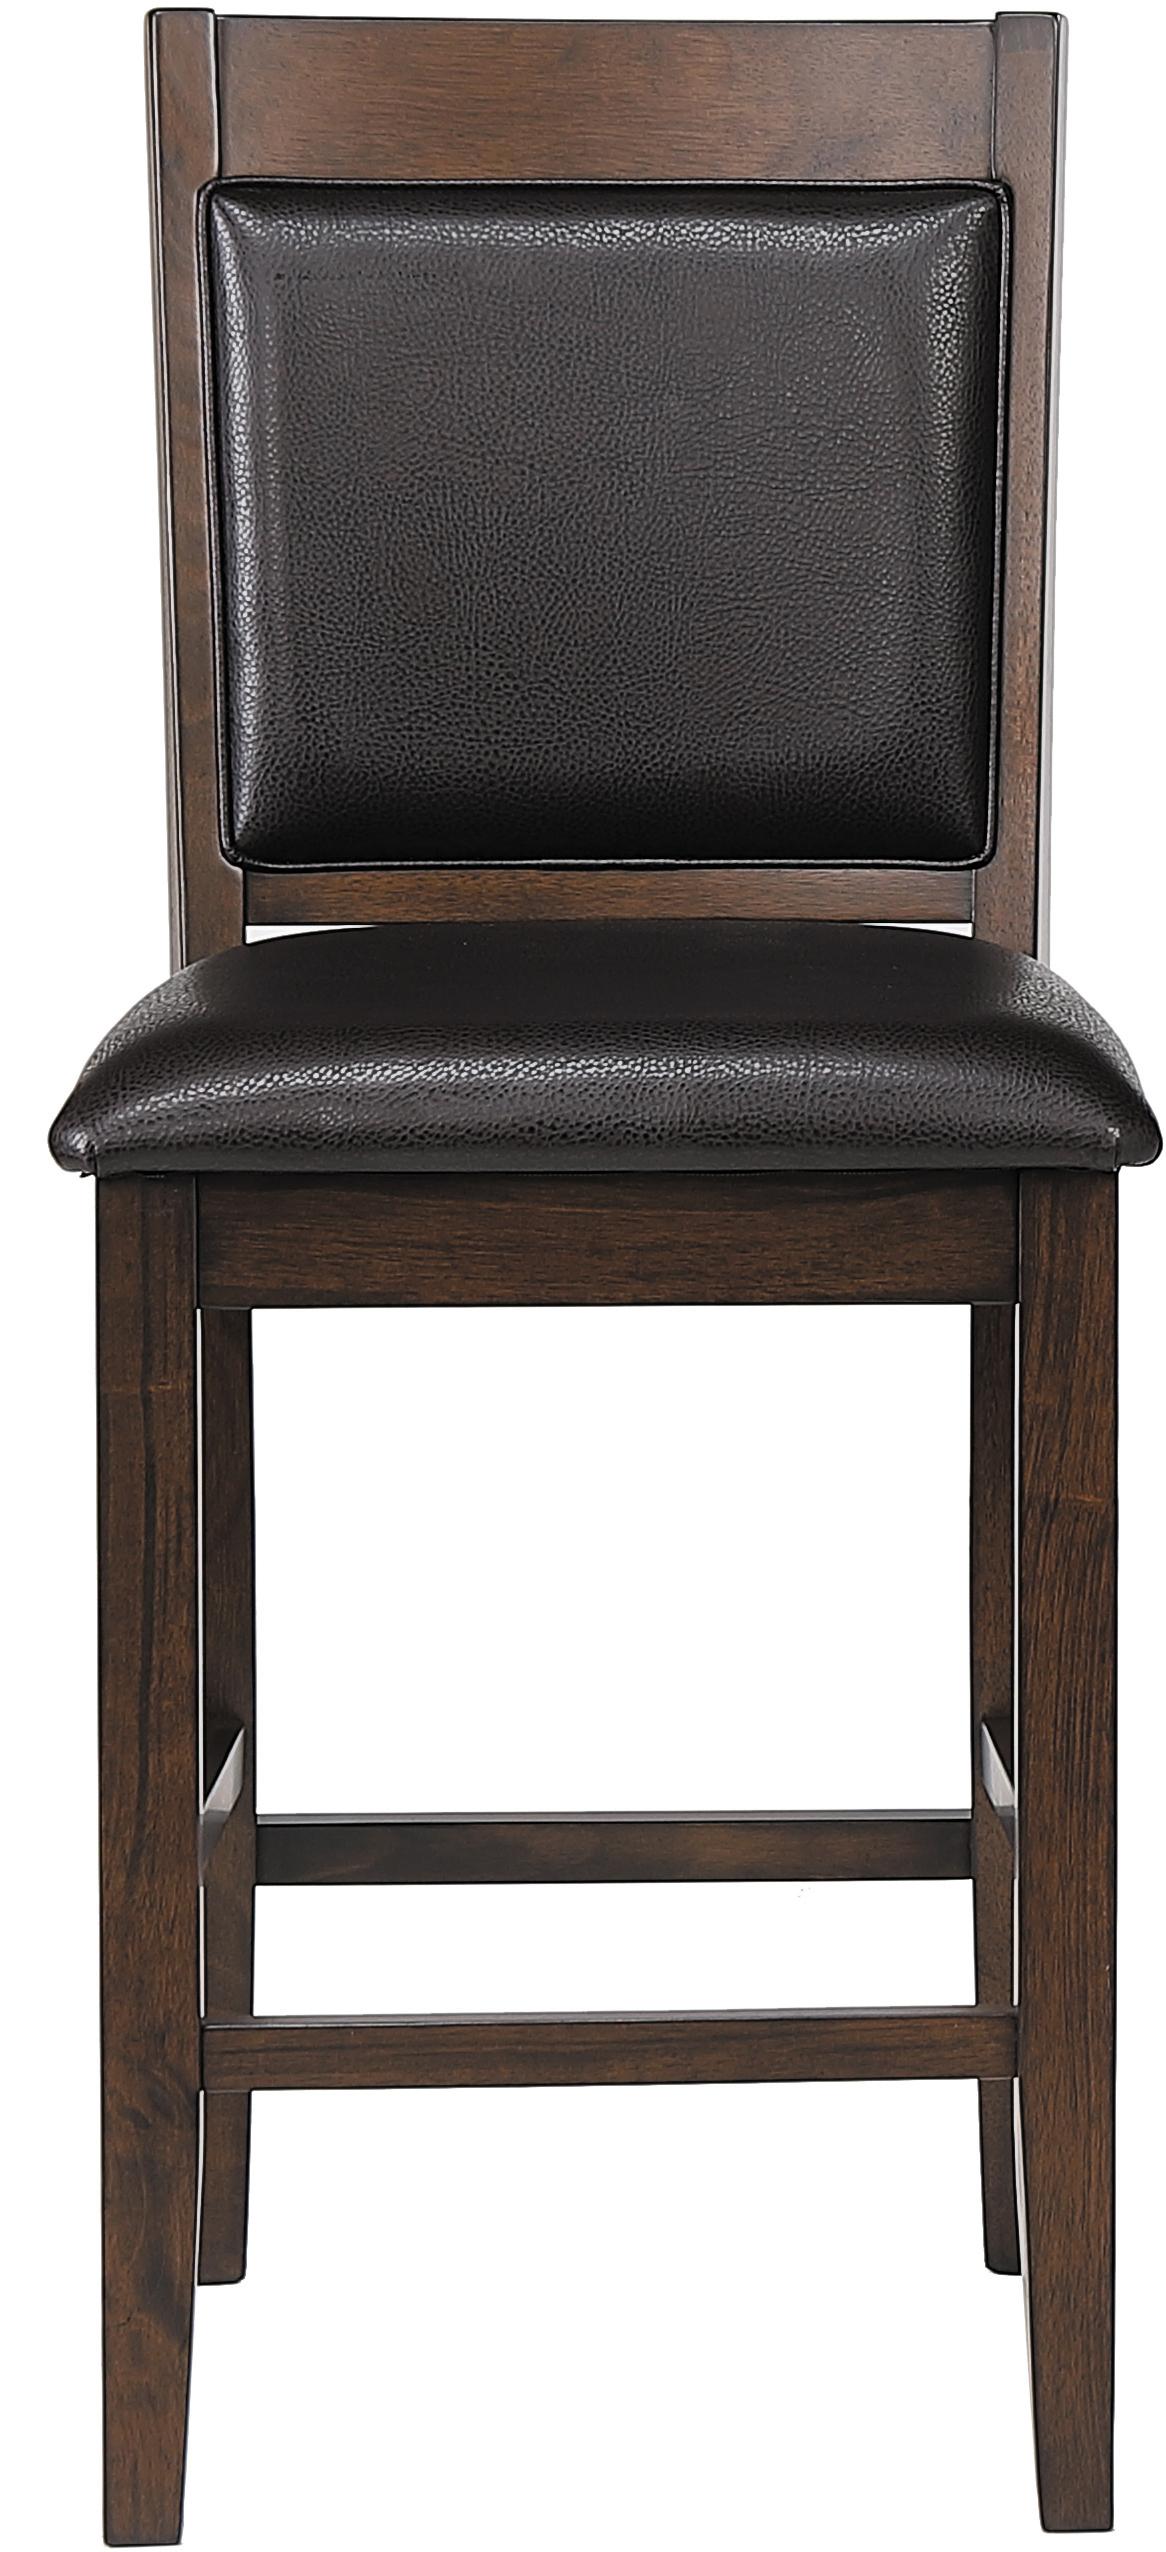 Transitional Counter Height Chair Set 115209 Dewey 115209 in Walnut Leatherette